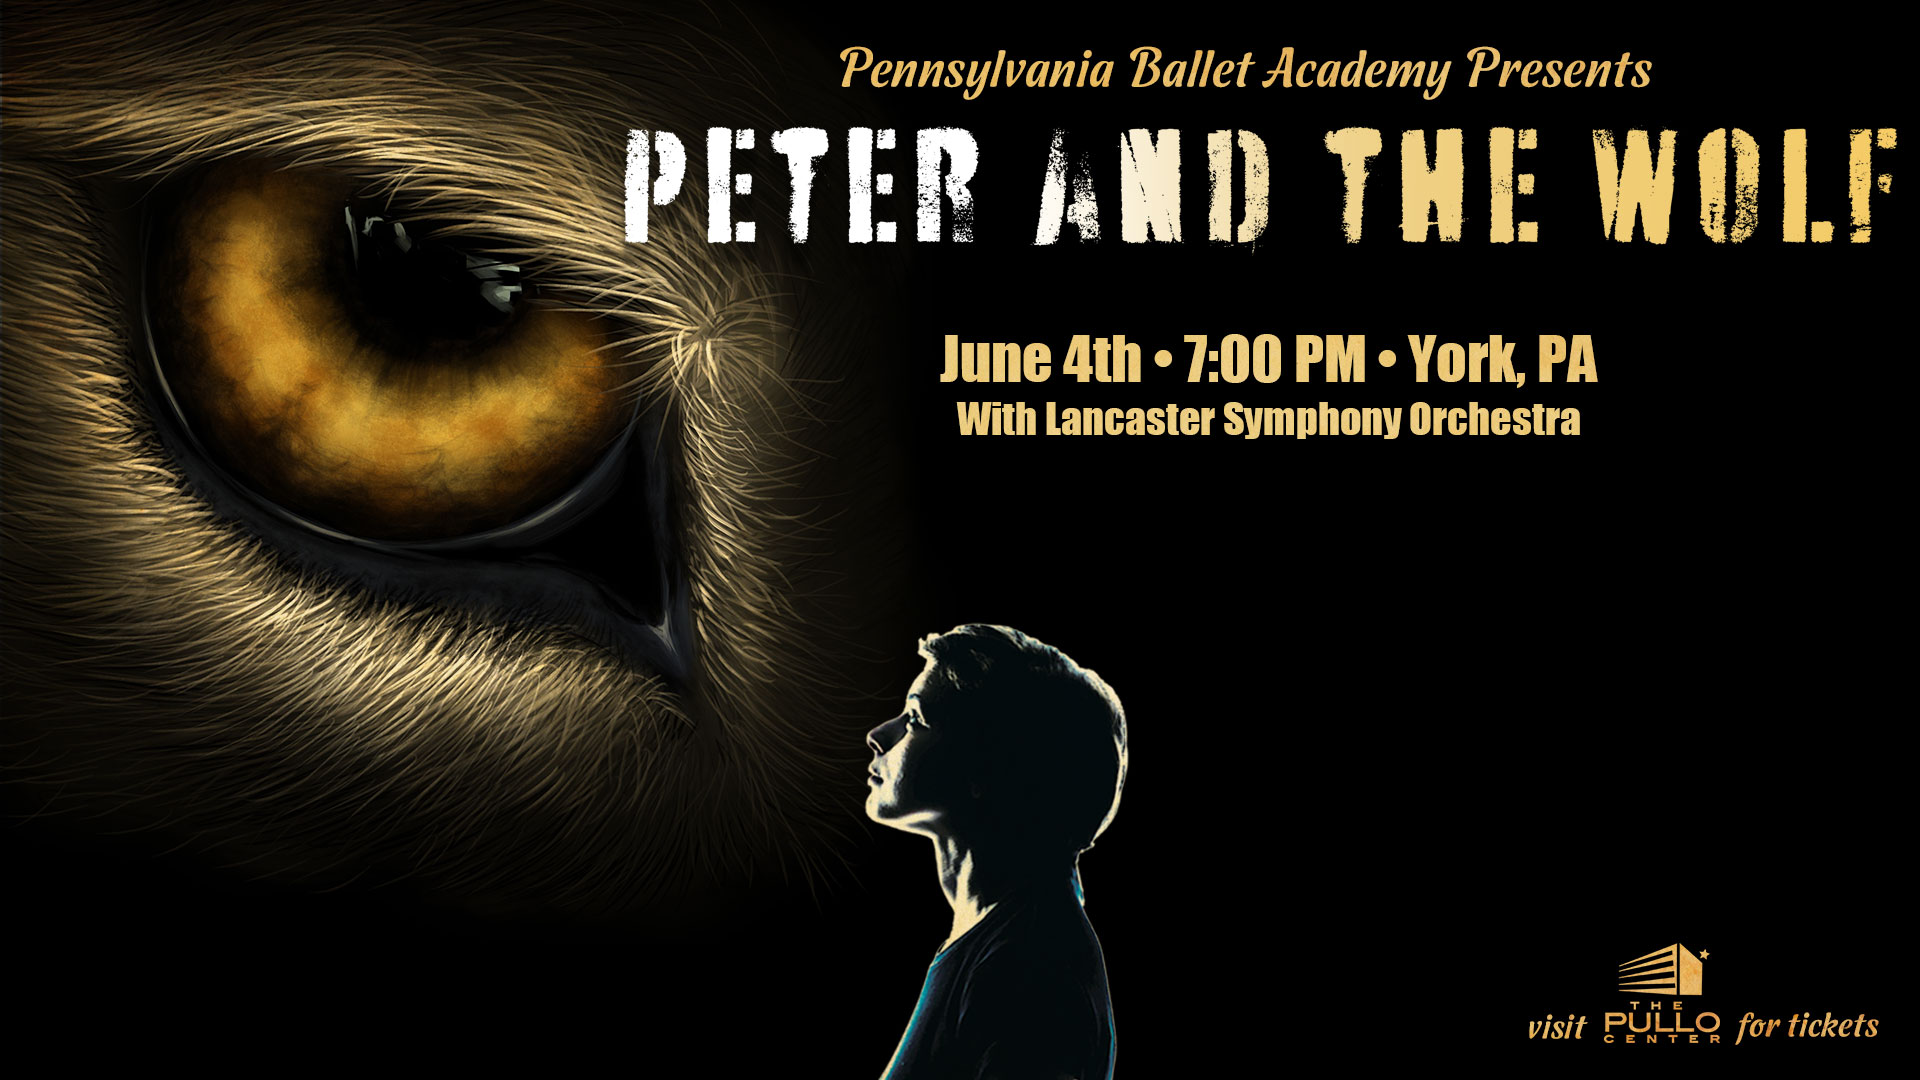 Pennsylvania Ballet Academy Presents: Peter and the Wolf with Lancaster Symphony Orchestra